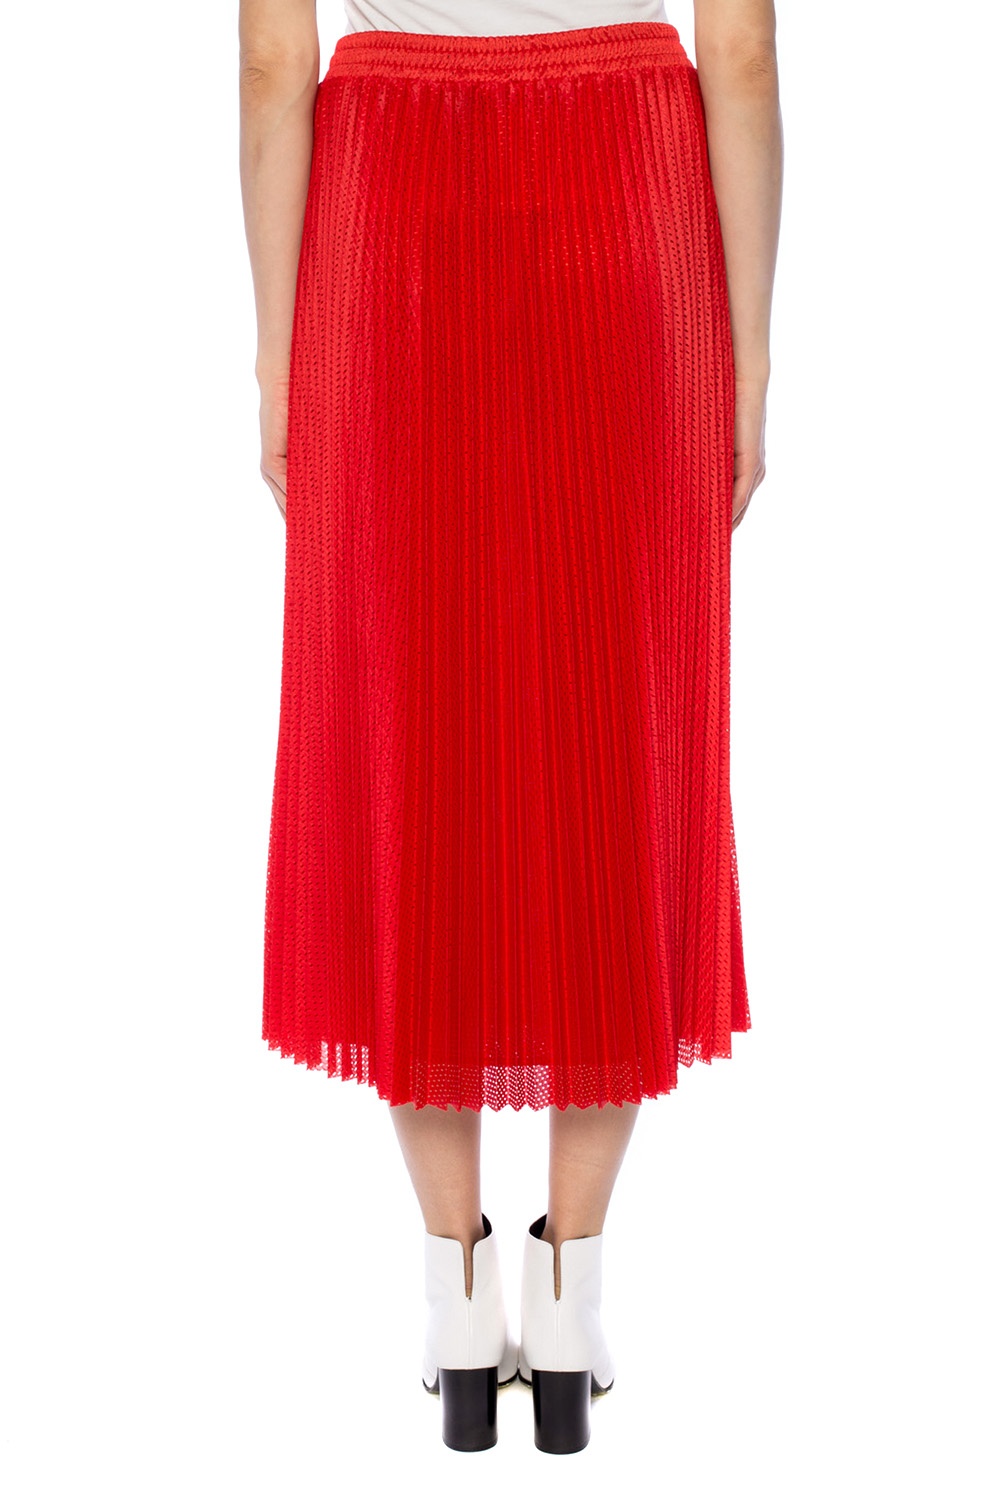 galning digital Gør gulvet rent Red Valentino Pleated skirt with perforations | Women's Clothing | Vitkac